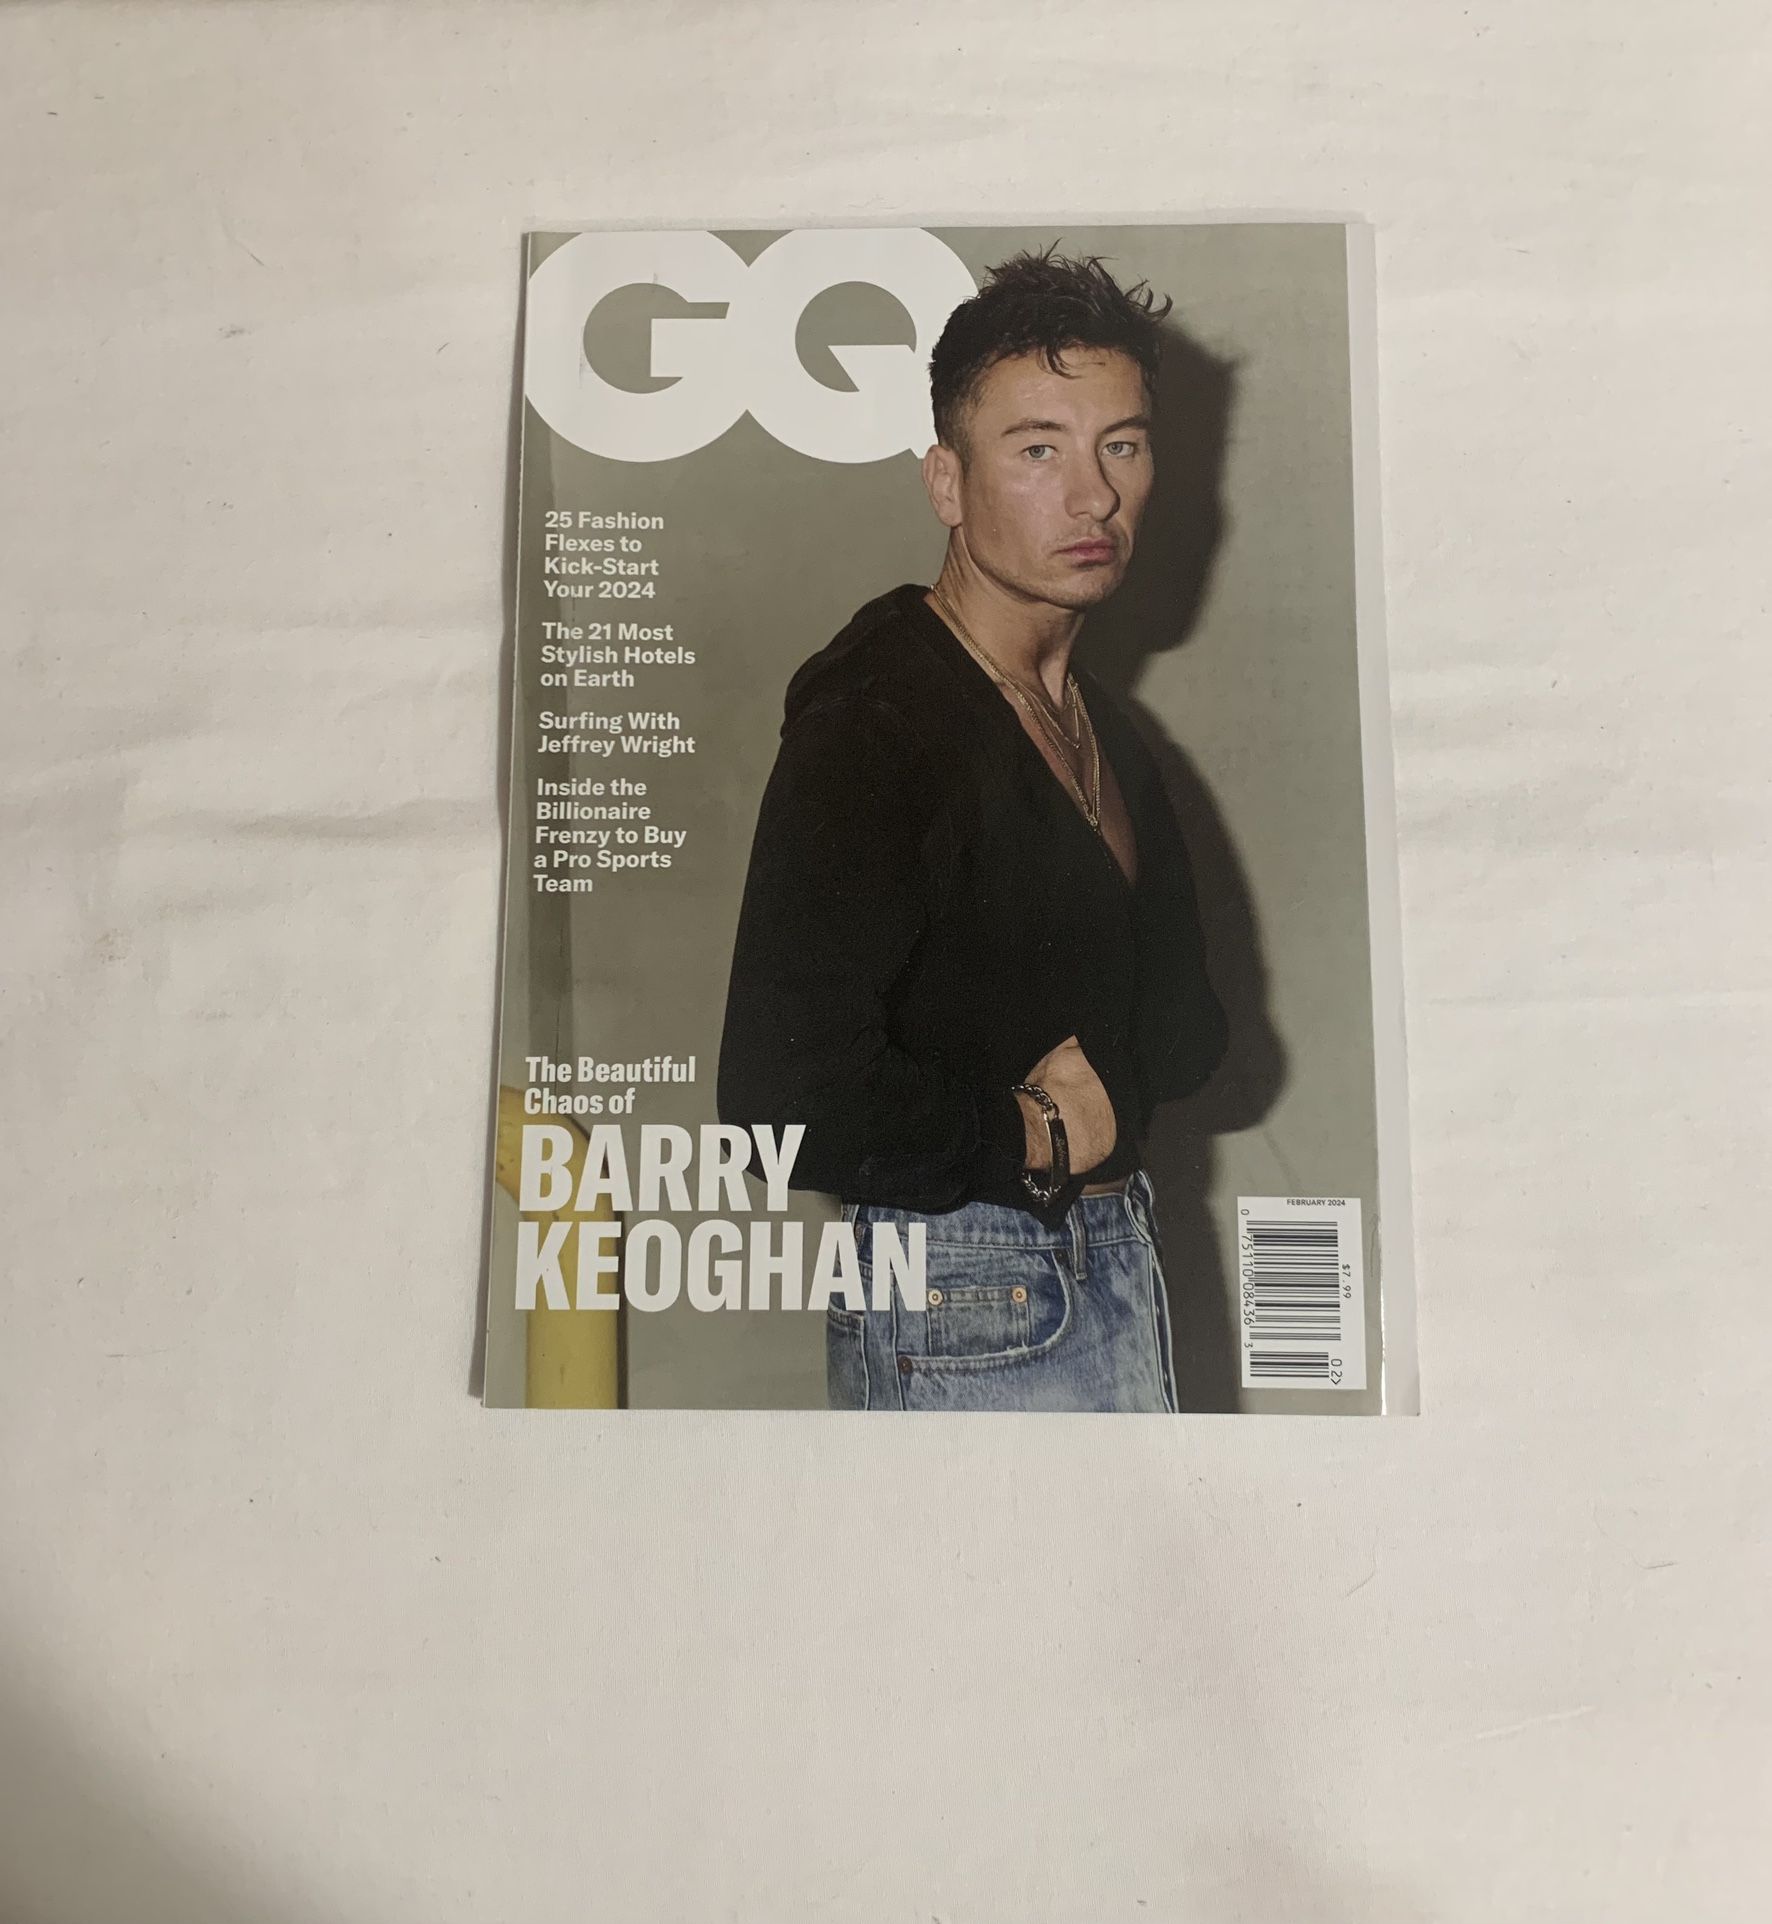 GQ Barry Keoghan “The Beautiful Chaos of” Issue February 2024 Magazine